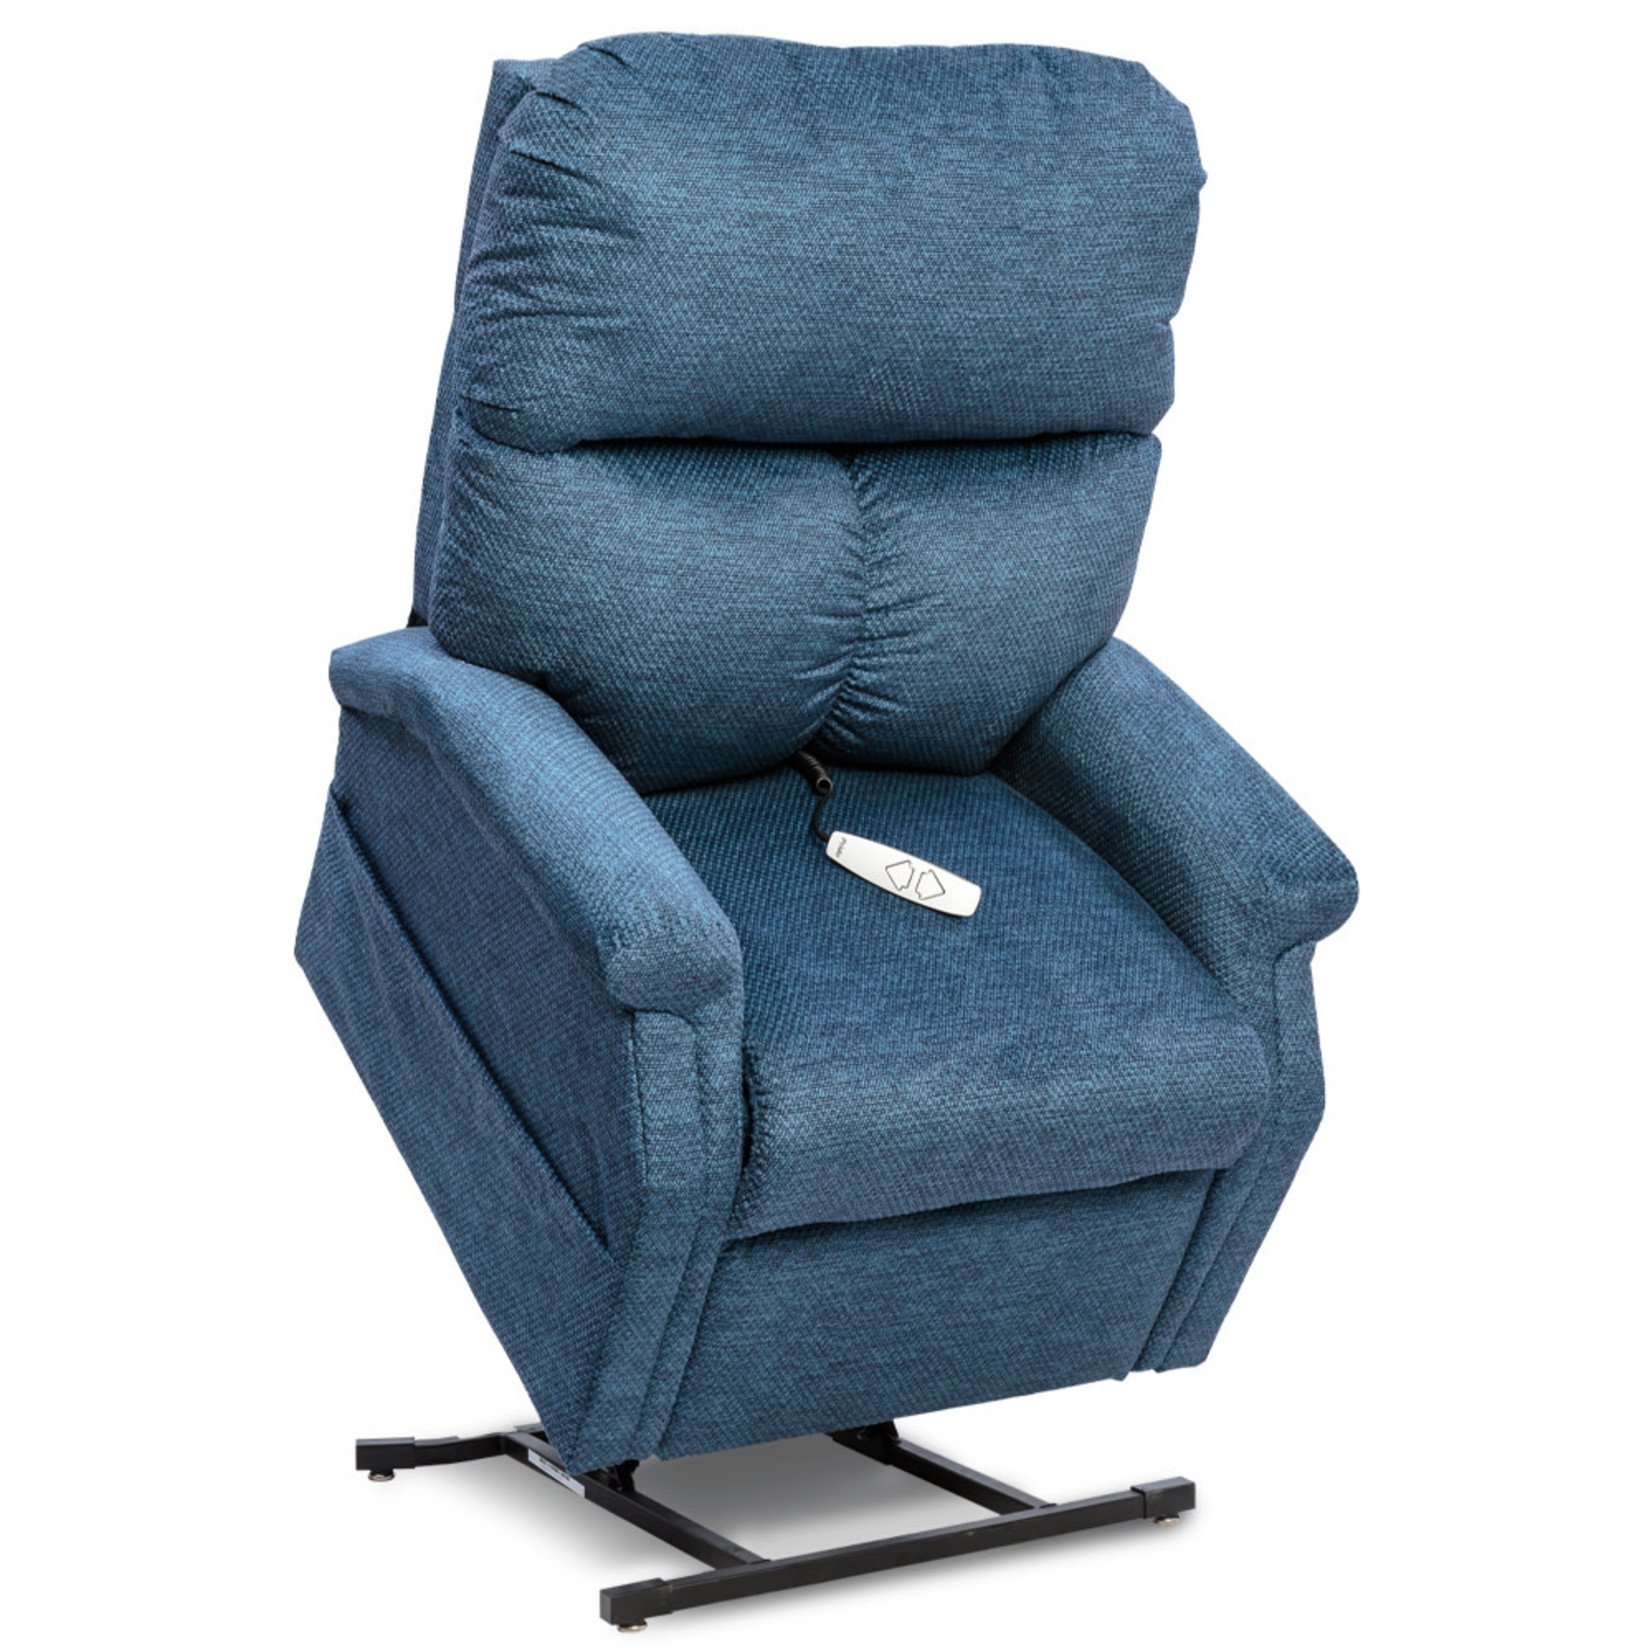 Pride Essential LC-250 Power Lift Recliner